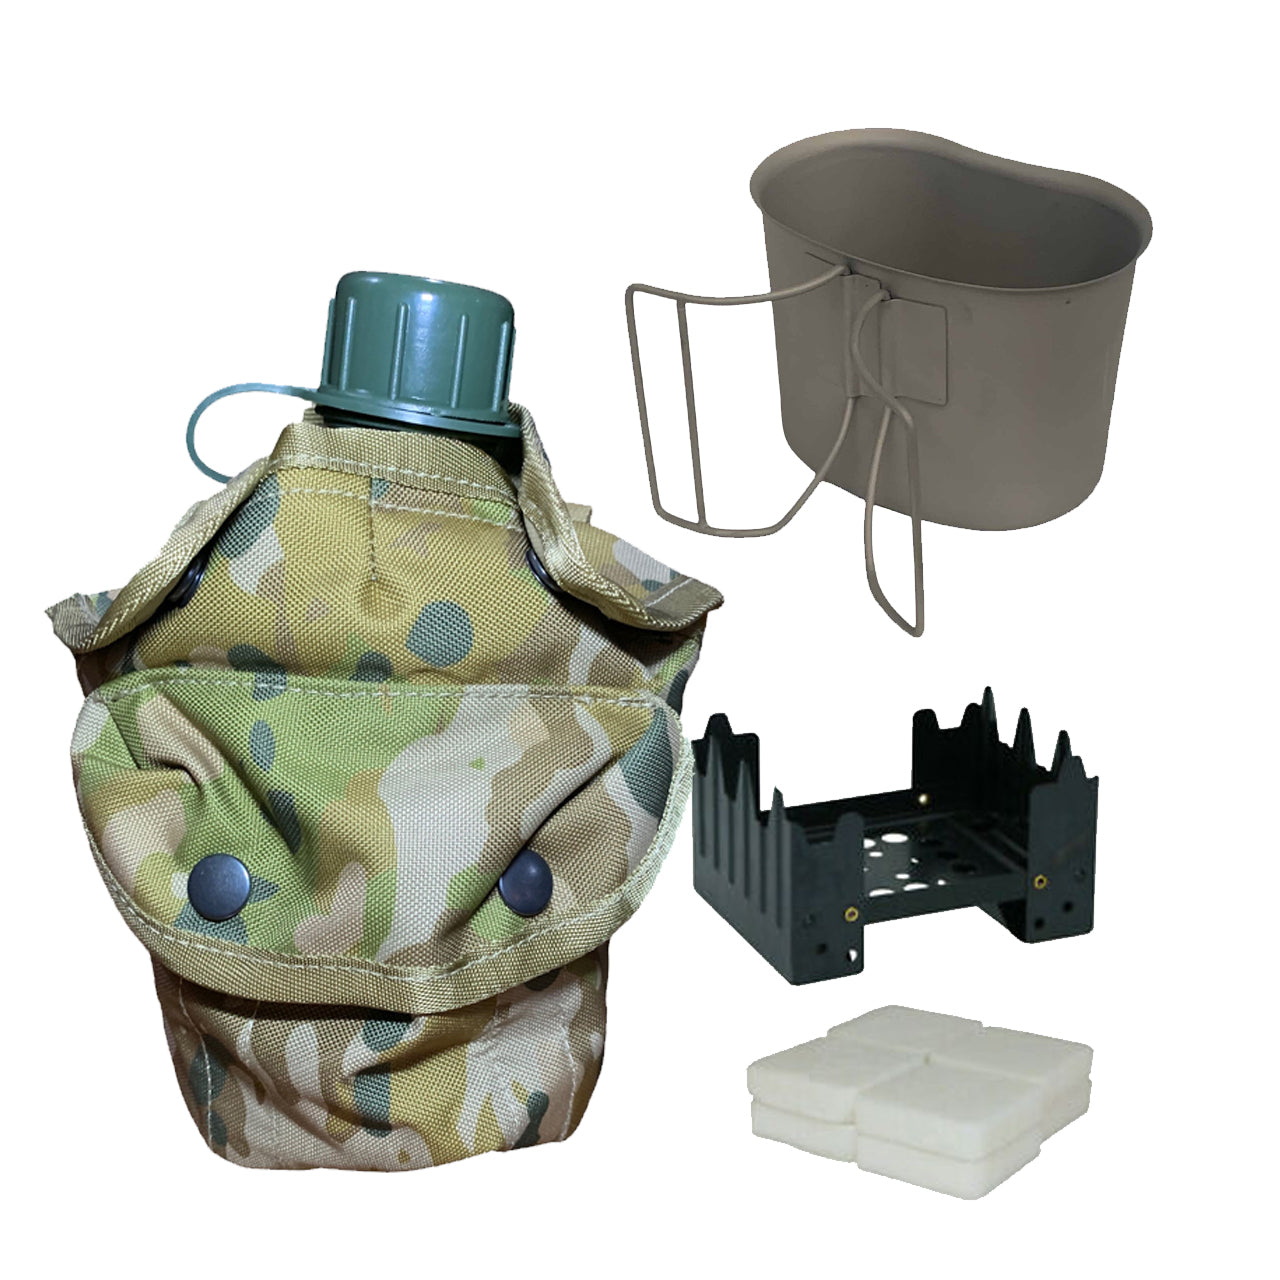 Perfect for military, cadets, outdoor events, emergency services, sporting events and camping www.defenceqstore.com.au